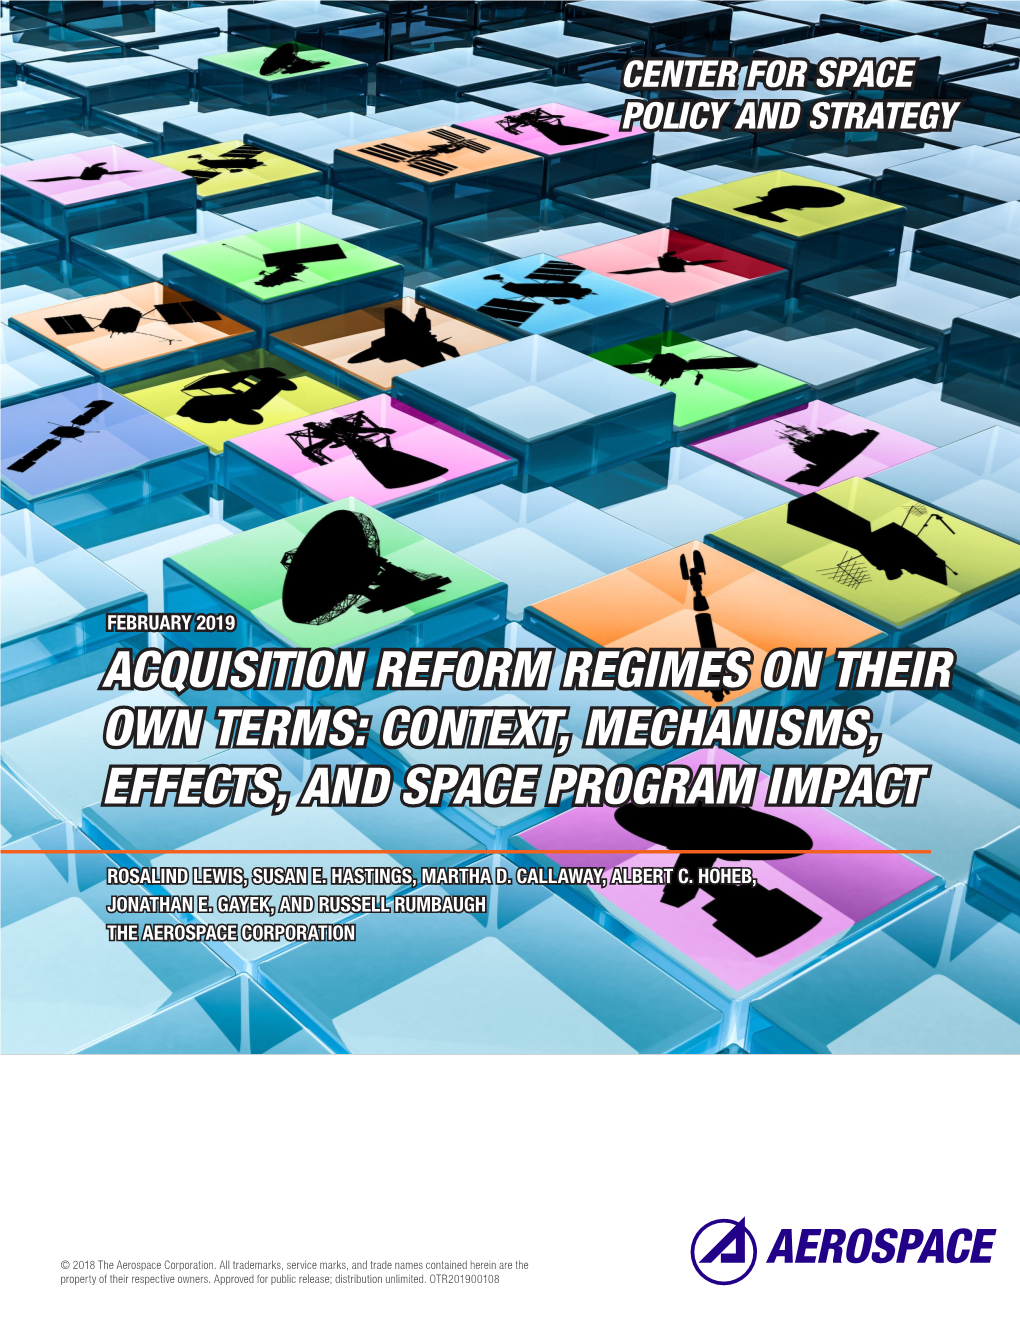 Acquisition Reform Regimes on Their Own Terms: Context, Mechanisms, Effects, and Space Program Impact